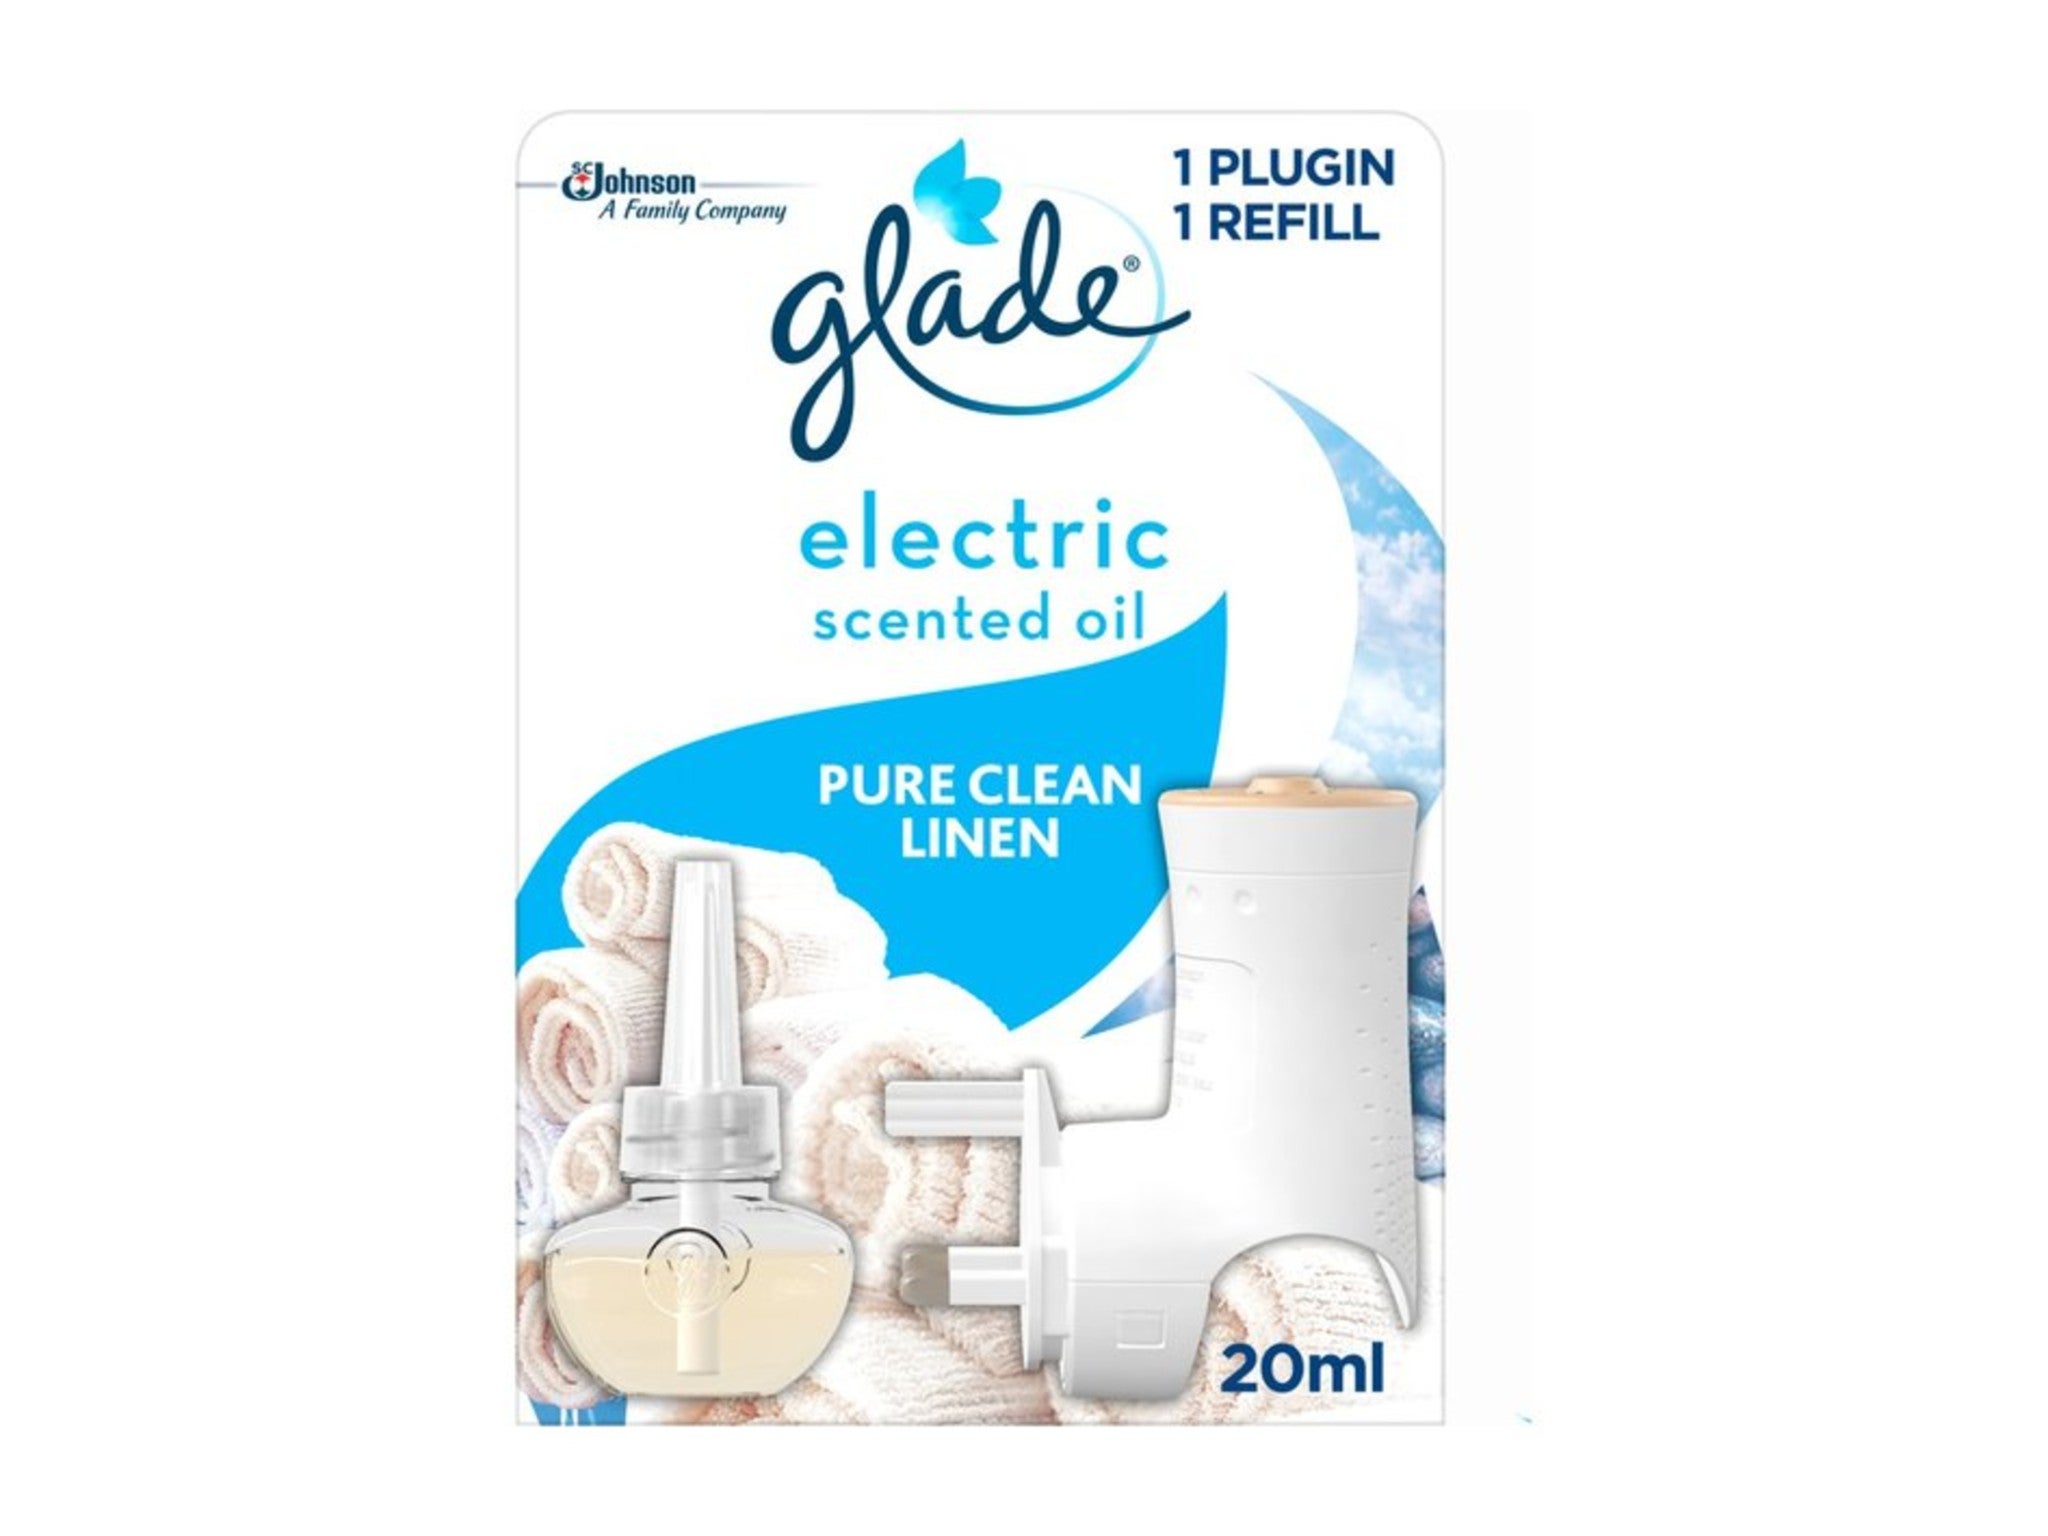 Glade electric scented oil plug-in indybest.jpeg